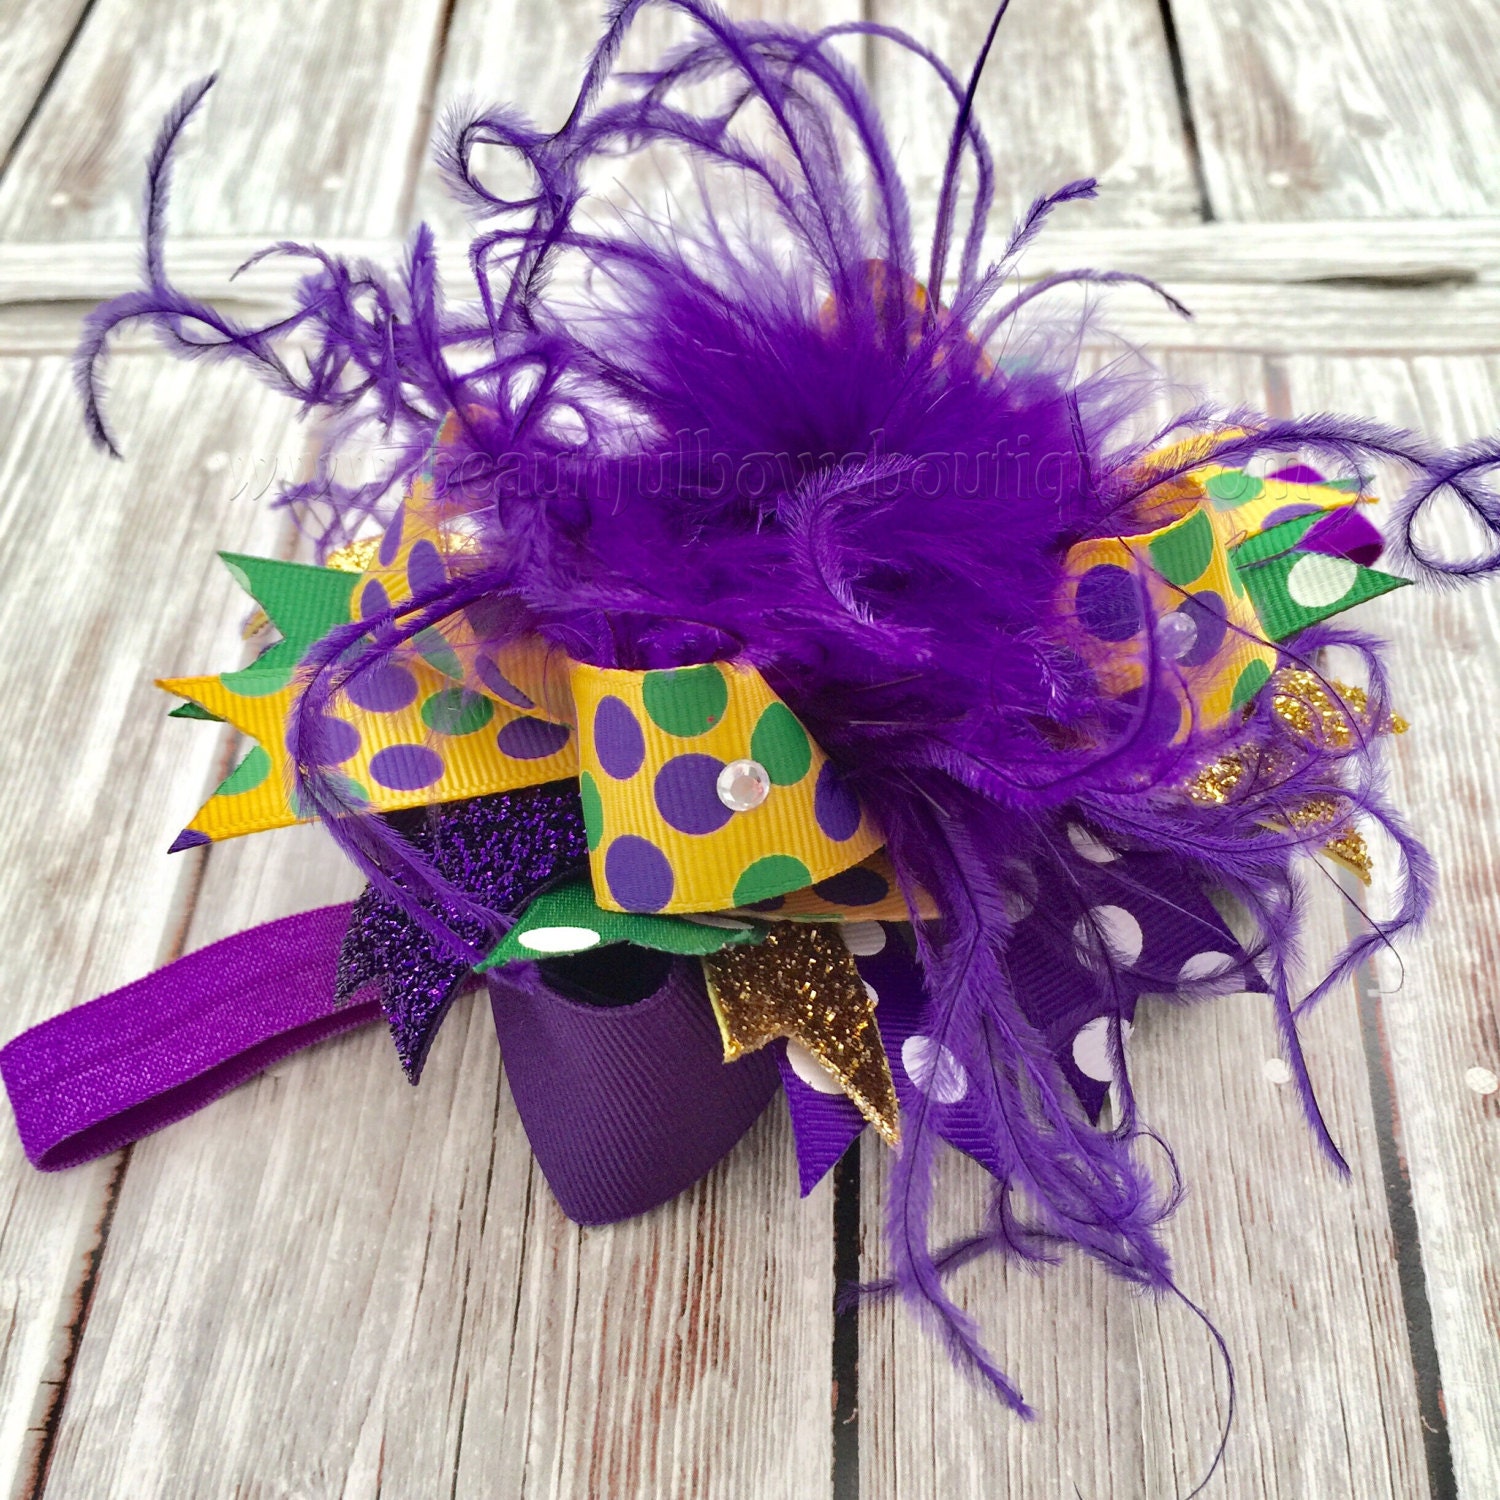 Spring Bows - Mardi Gras Bows - Wired Mardi Gras Shimmering Stripes Bow 10  Inch